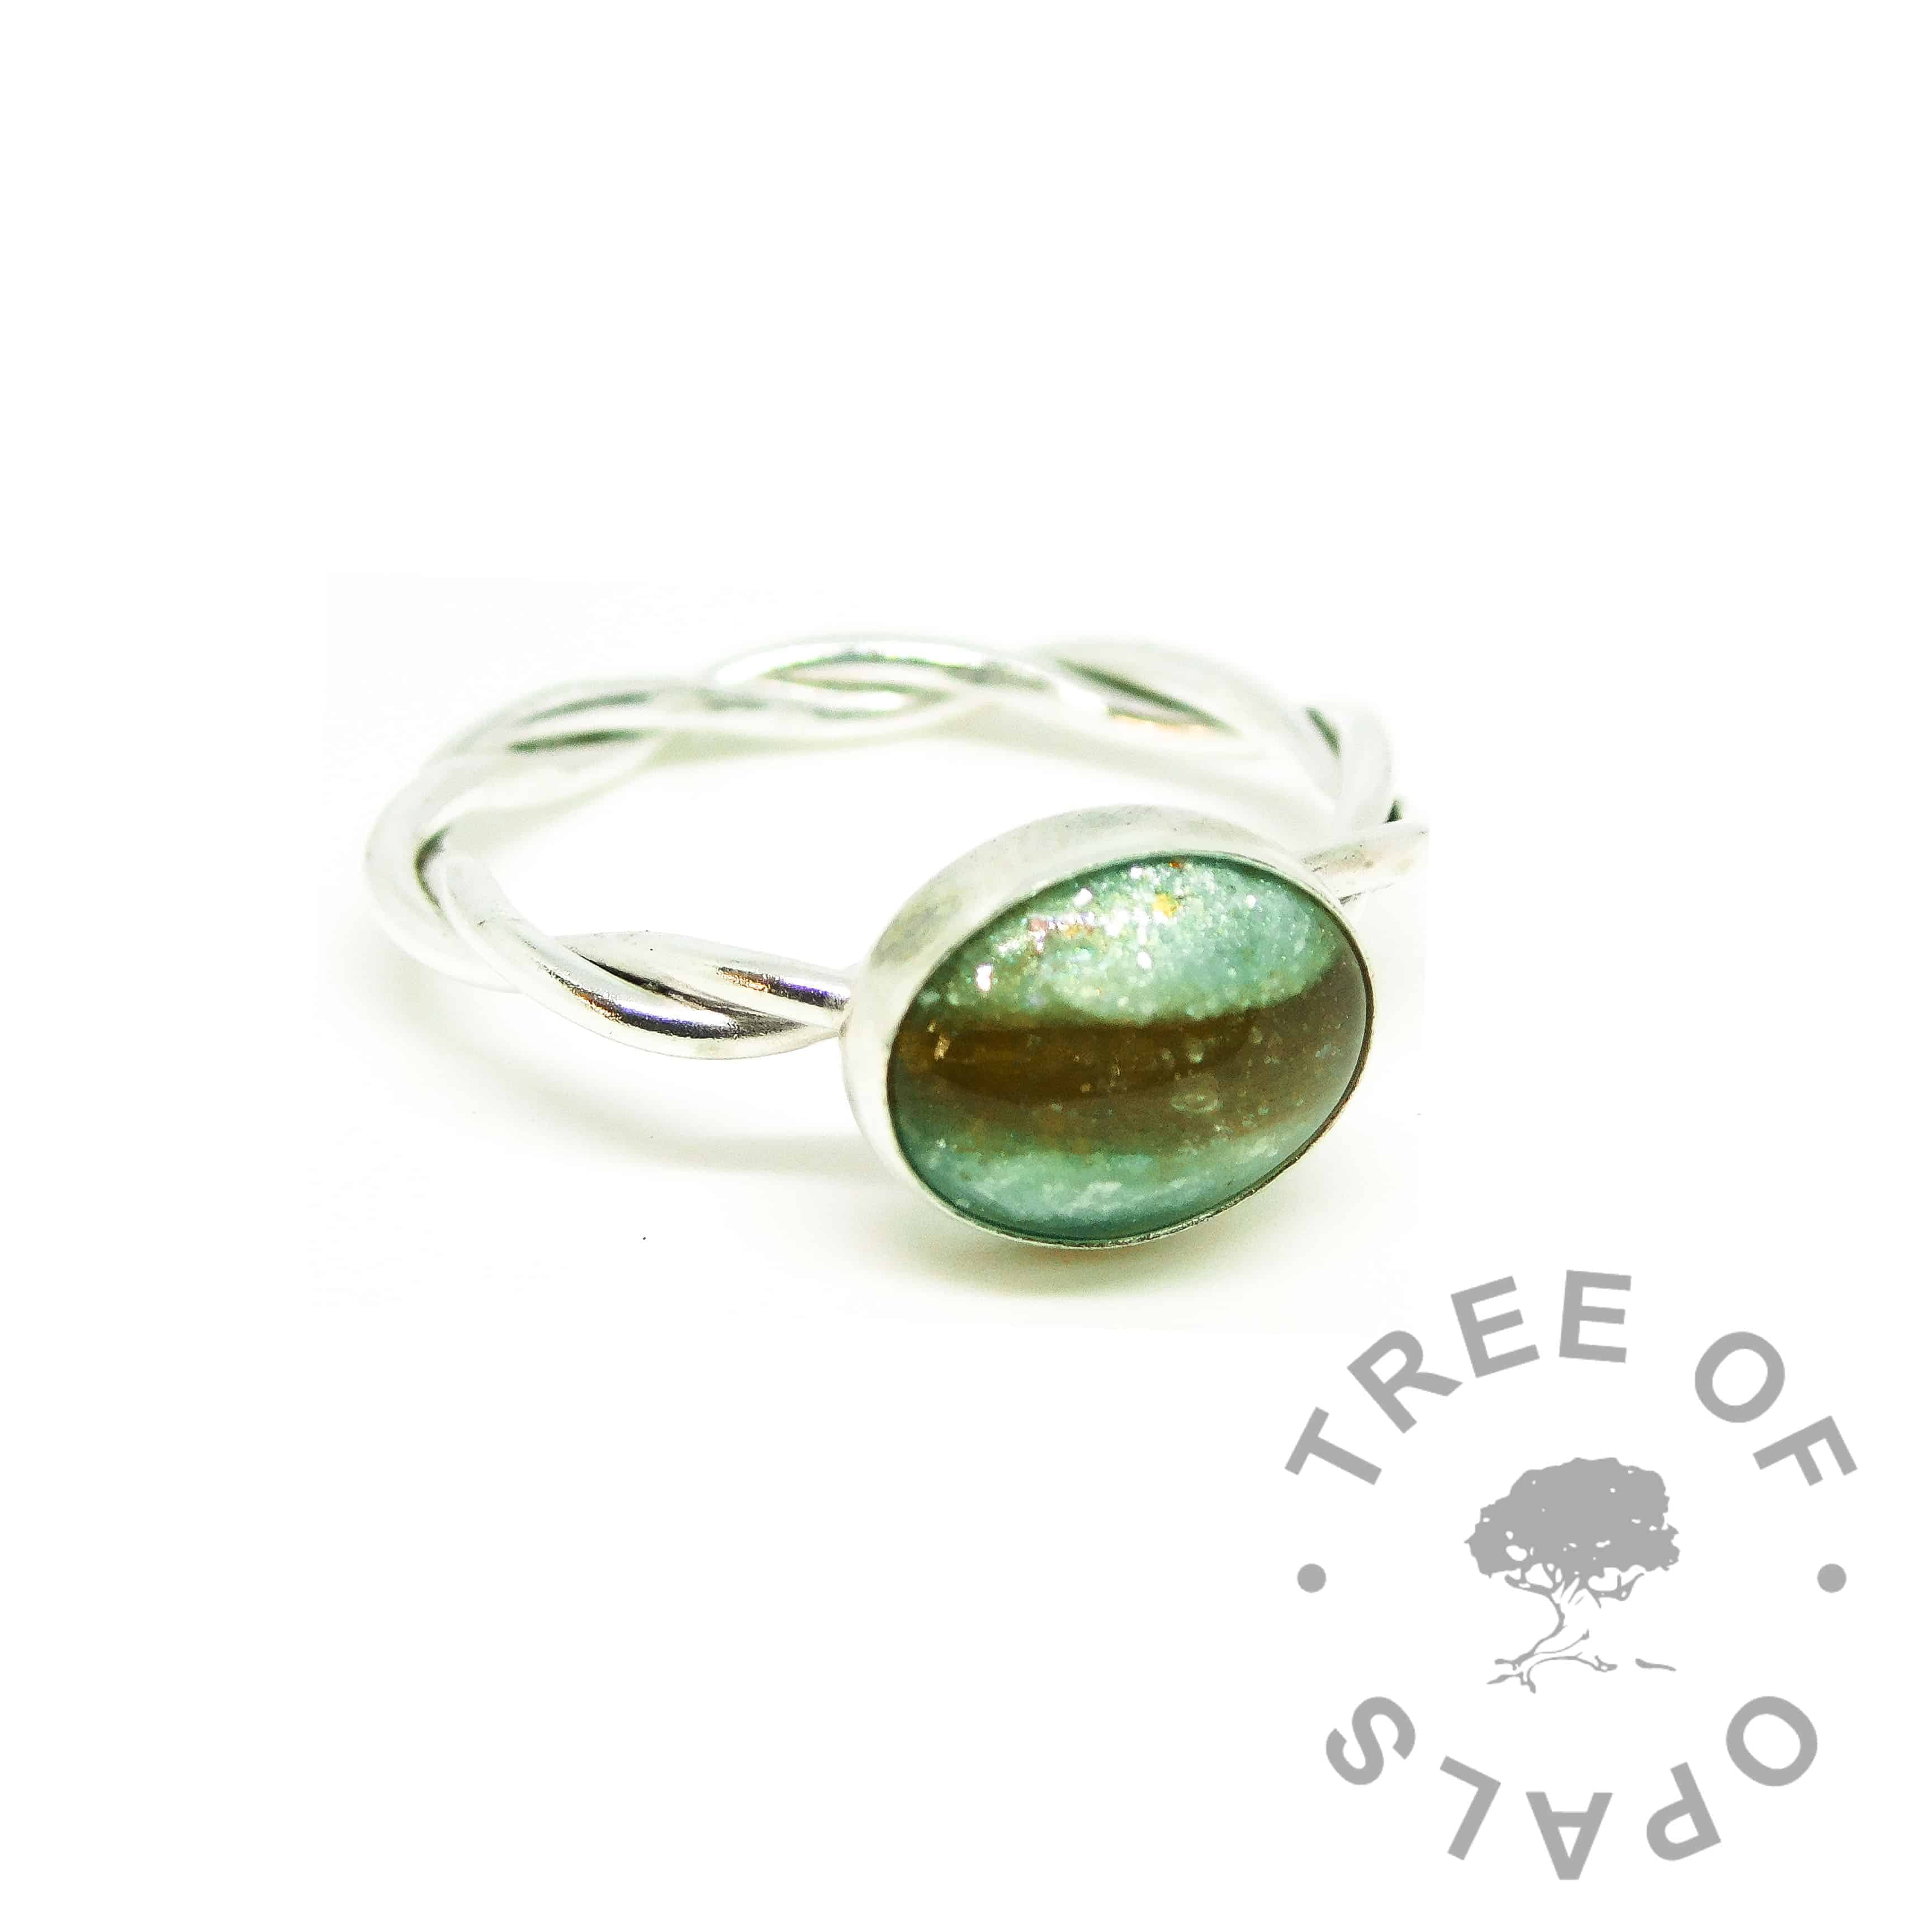 aqua hair ring, angelic aqua resin sparkle mix, twisted wire Argentium silver band